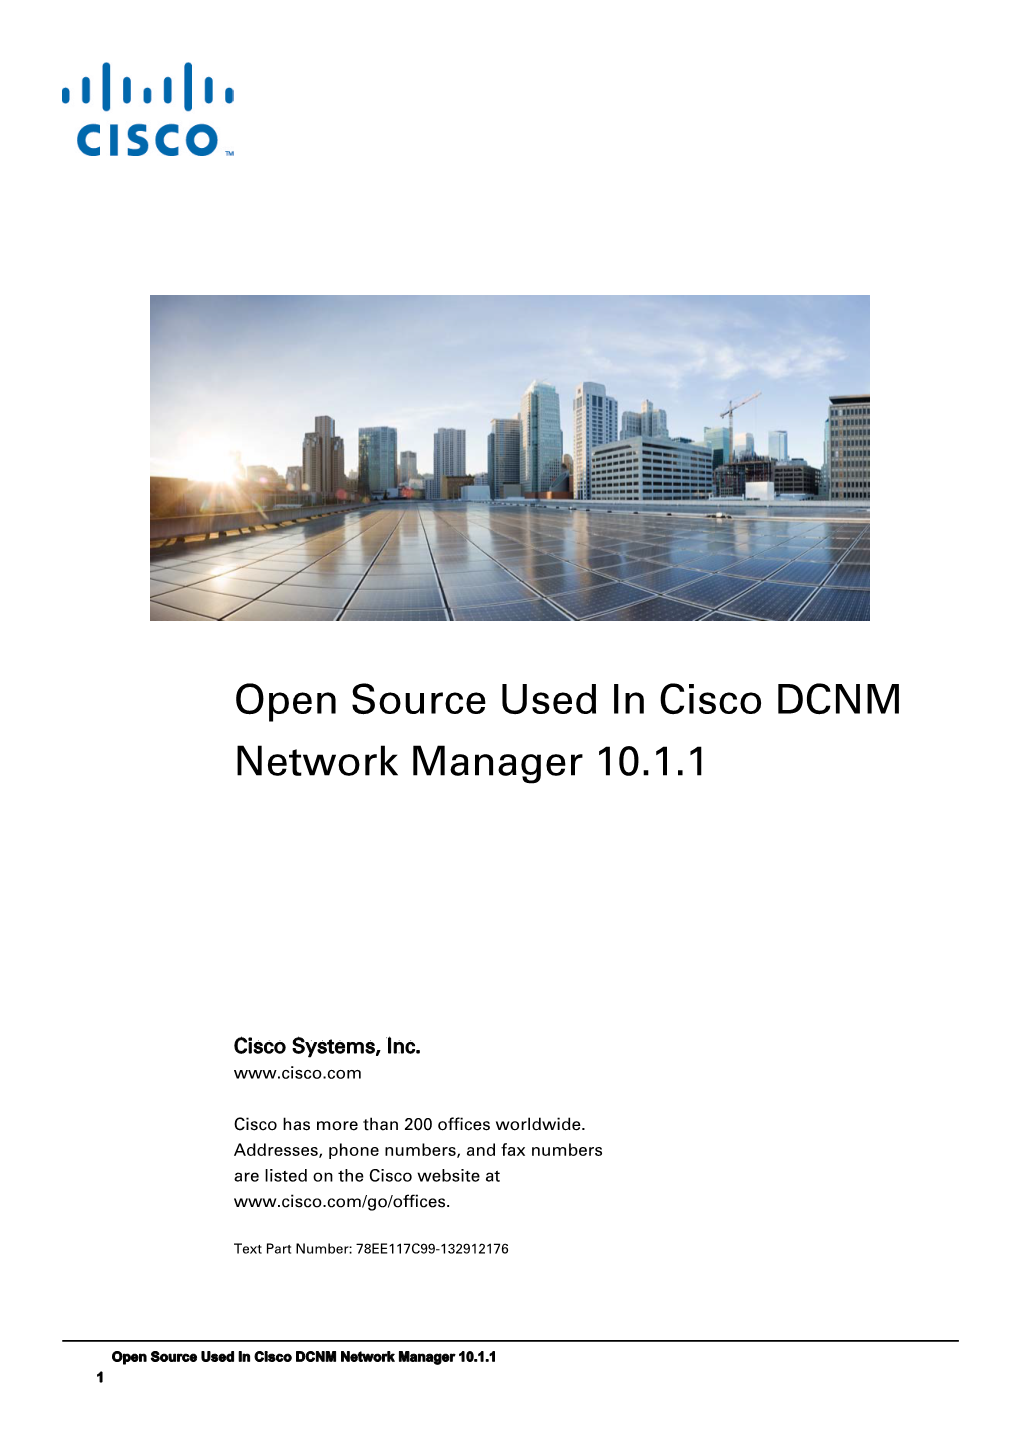 Open Source Used in Cisco DCNM Network Manager 10.1.1